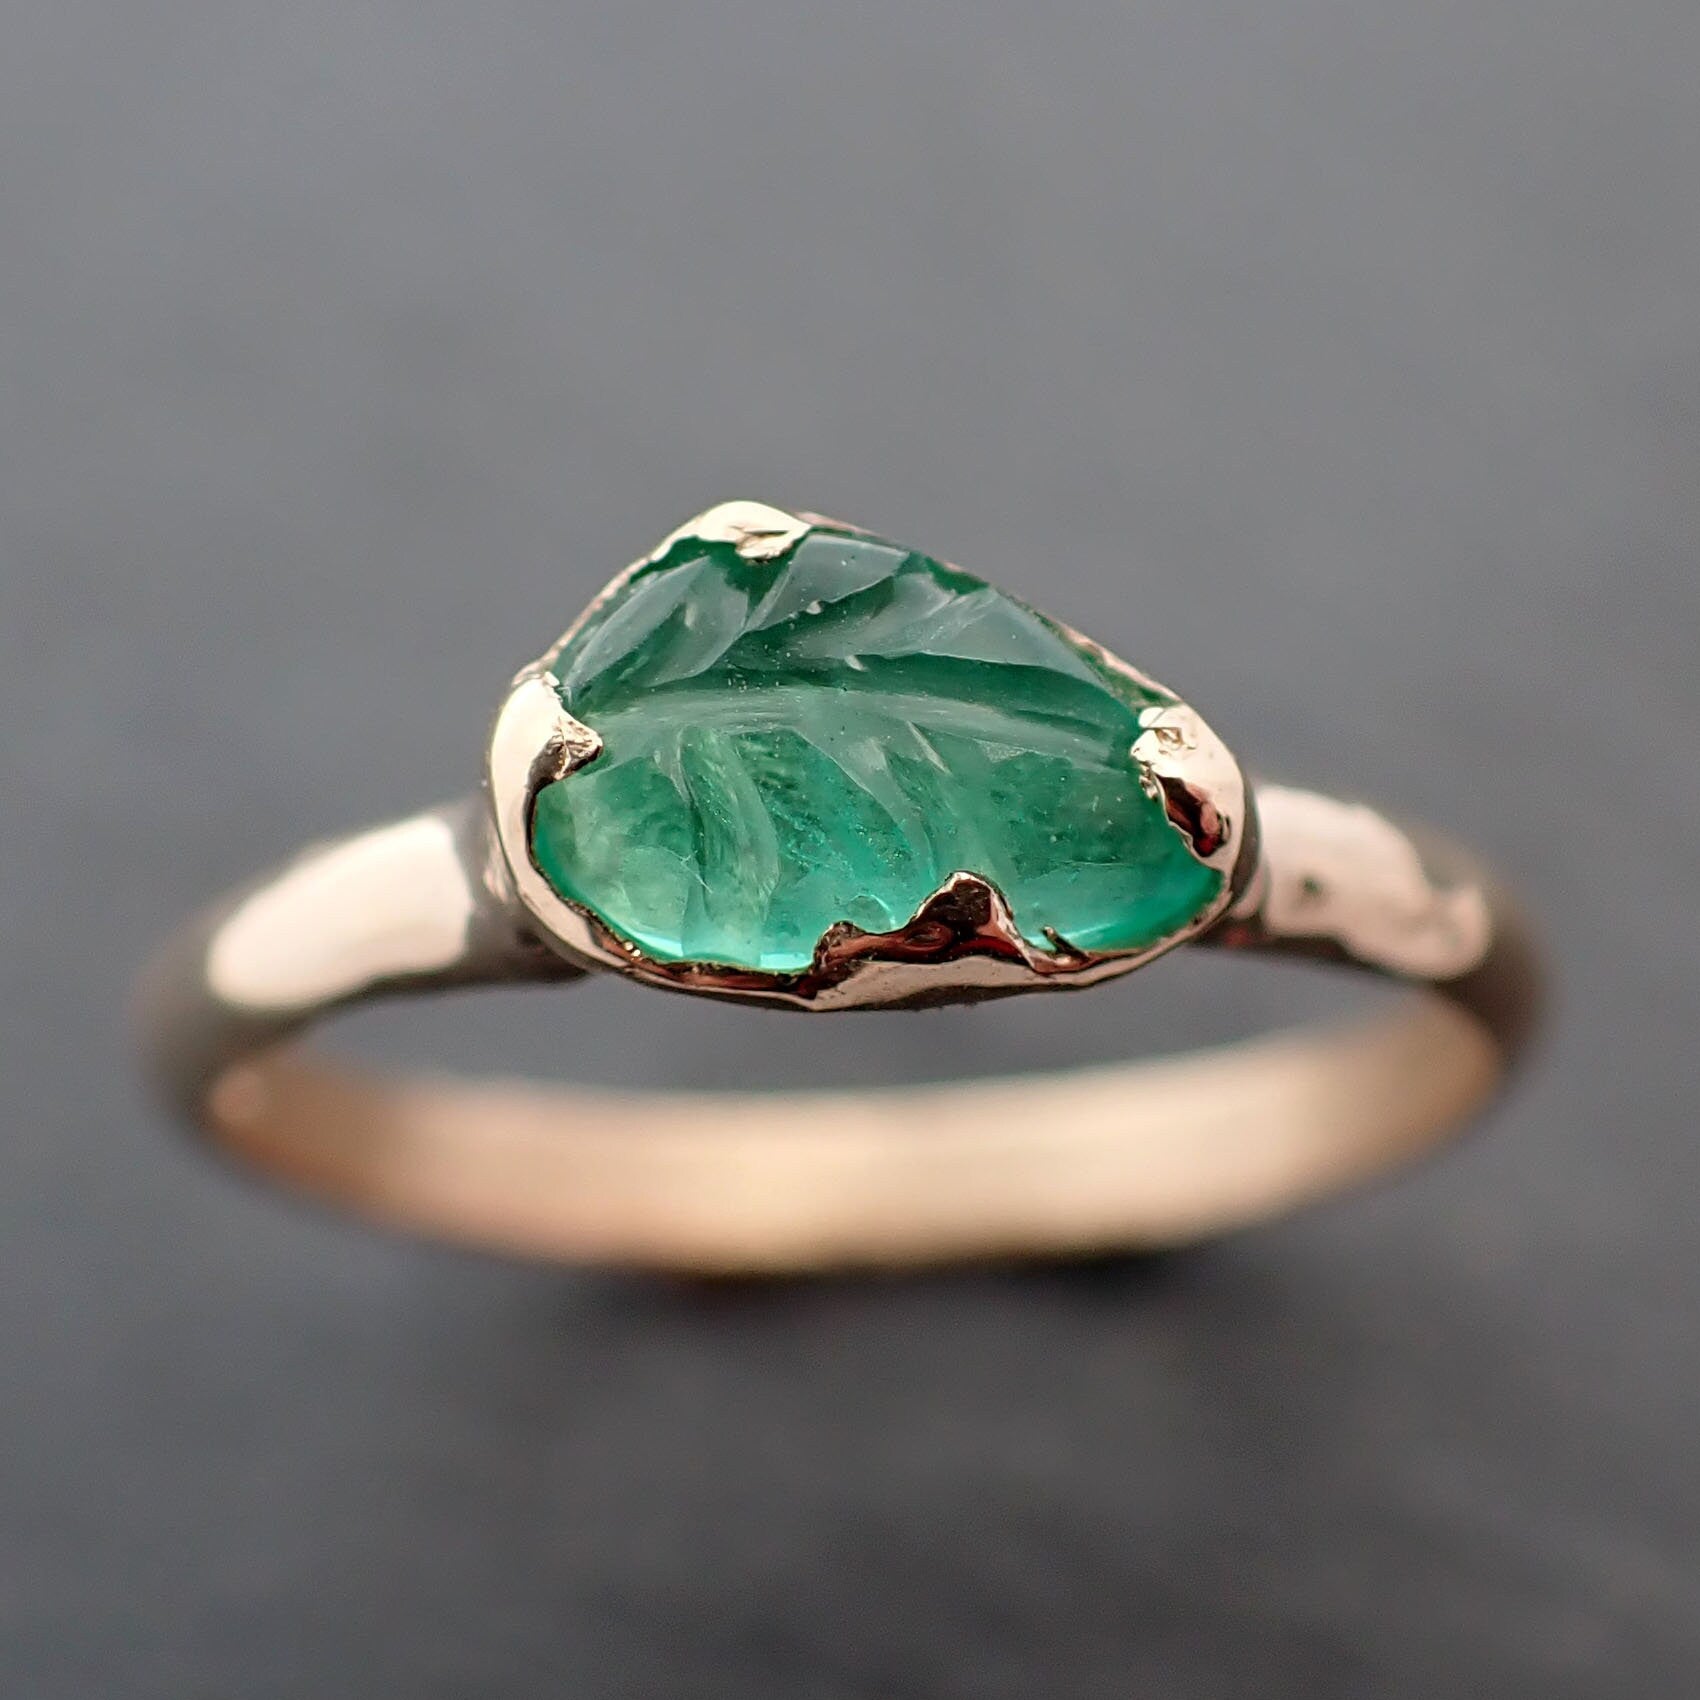 Carved Leaf Emerald Solitaire yellow 14k Gold Ring Birthstone One Of a Kind Gemstone Ring Recycled 3459